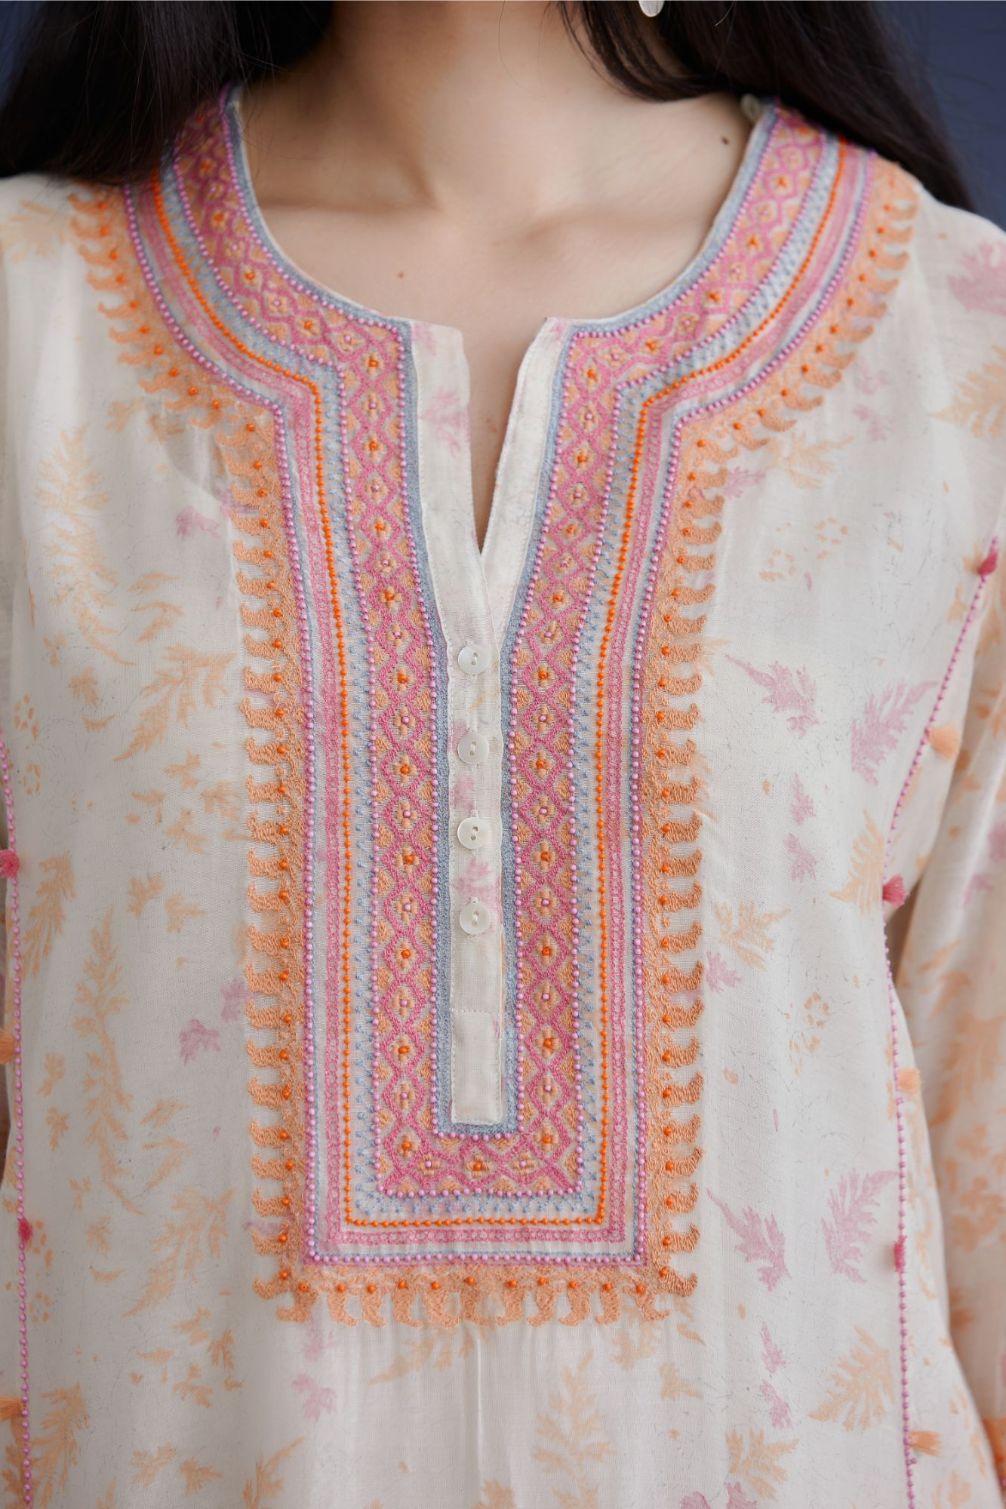 Off white straight kurta set with heavy embroidered button placket neckline and delicate bead and tassel embroidery at side panel joint seams